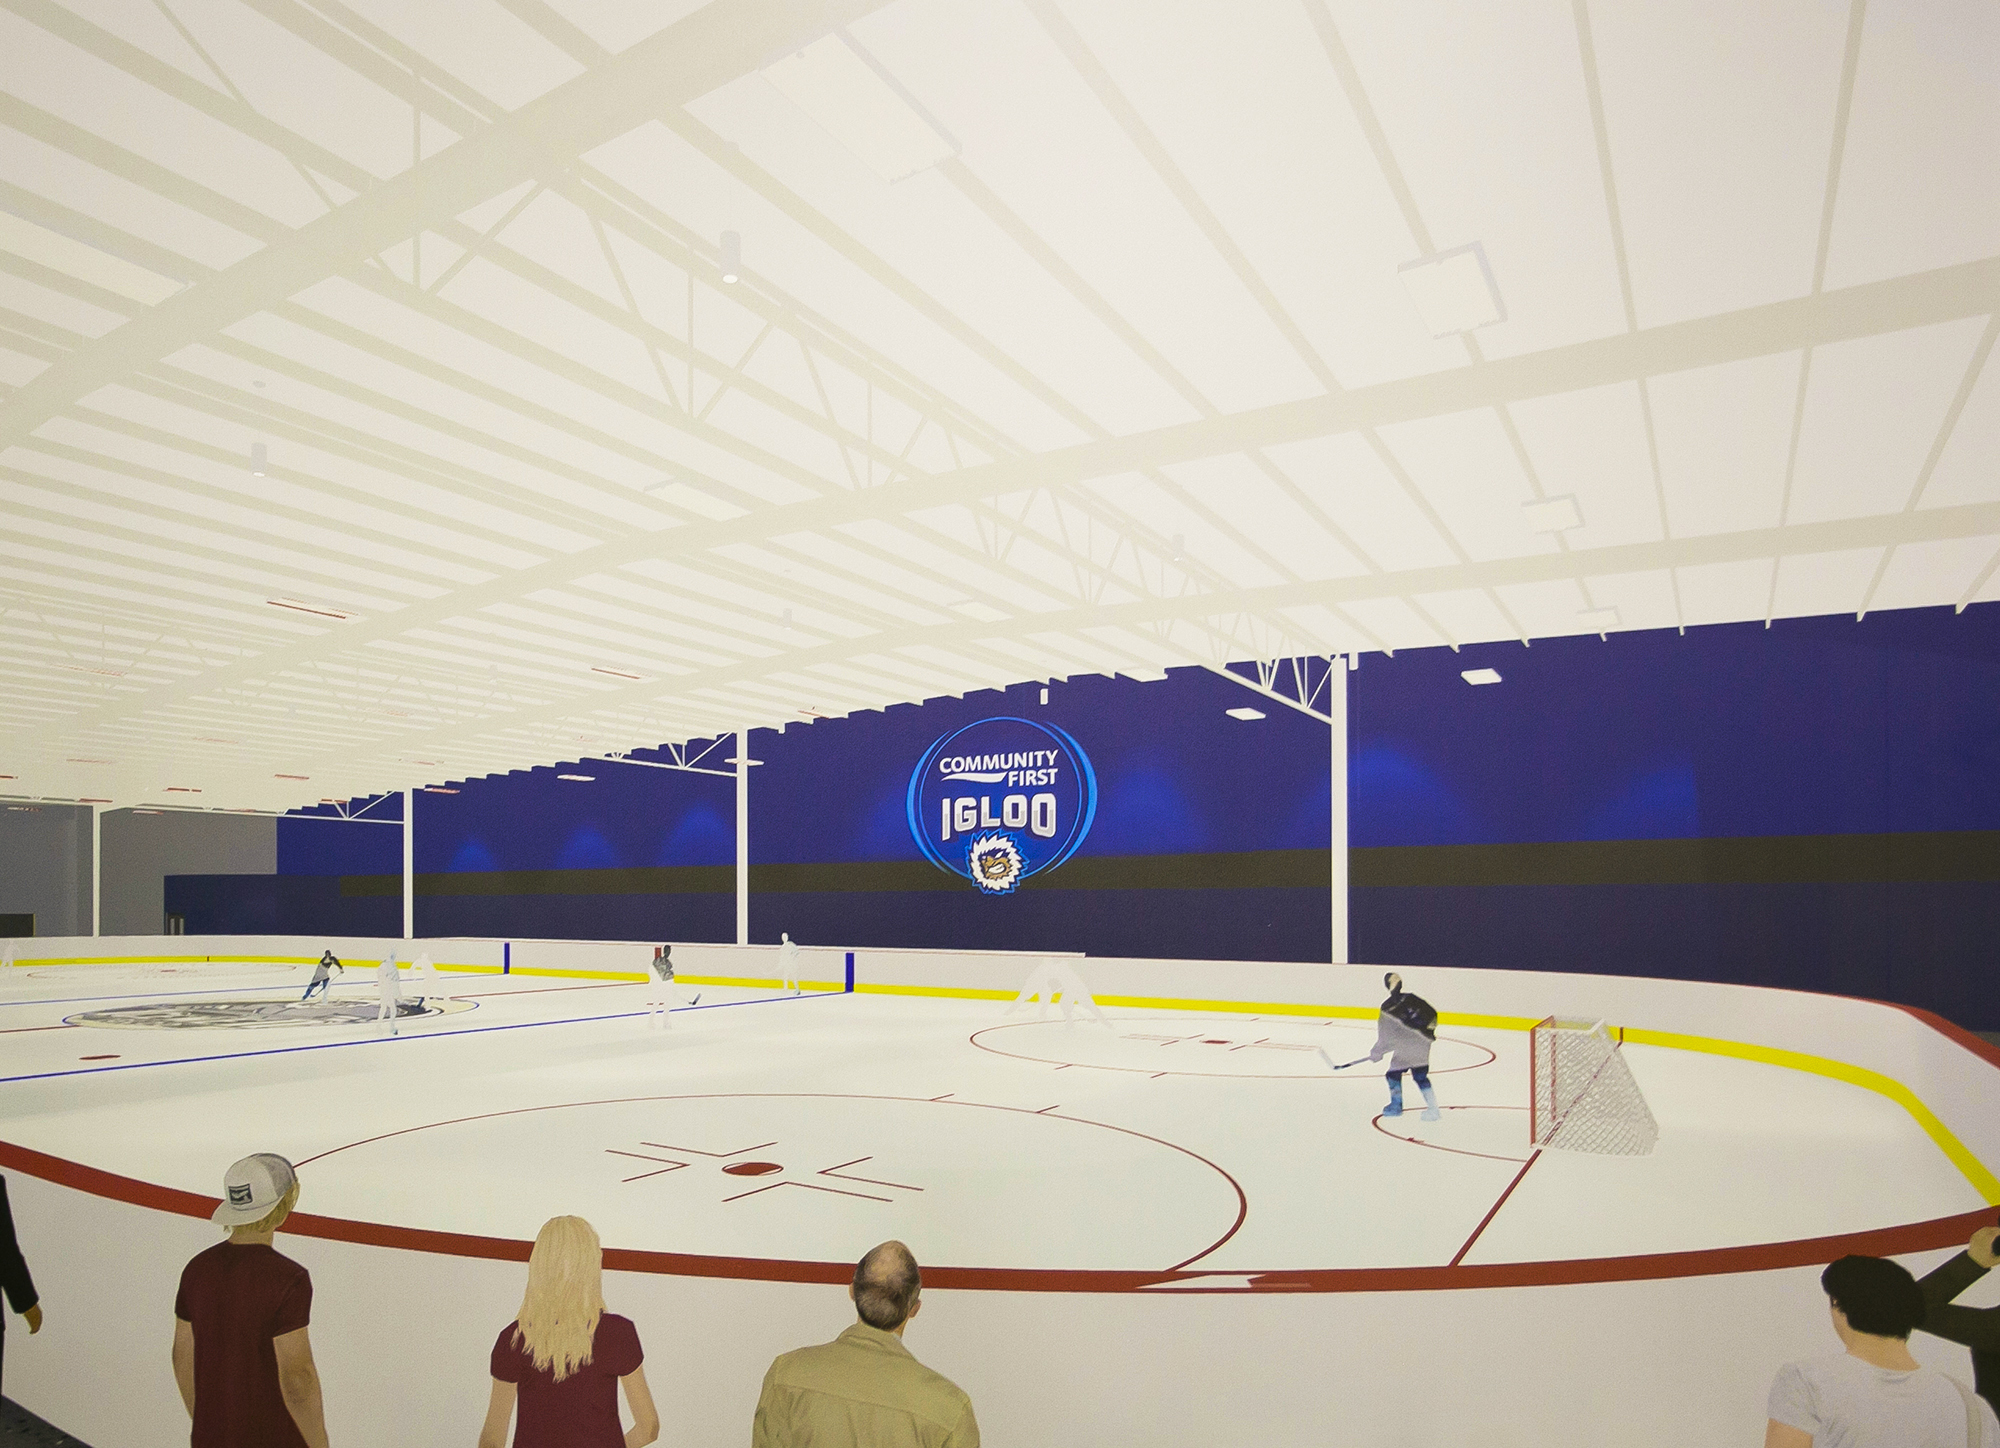 A second ice rink is planned to be added inside the Community First Igloo.